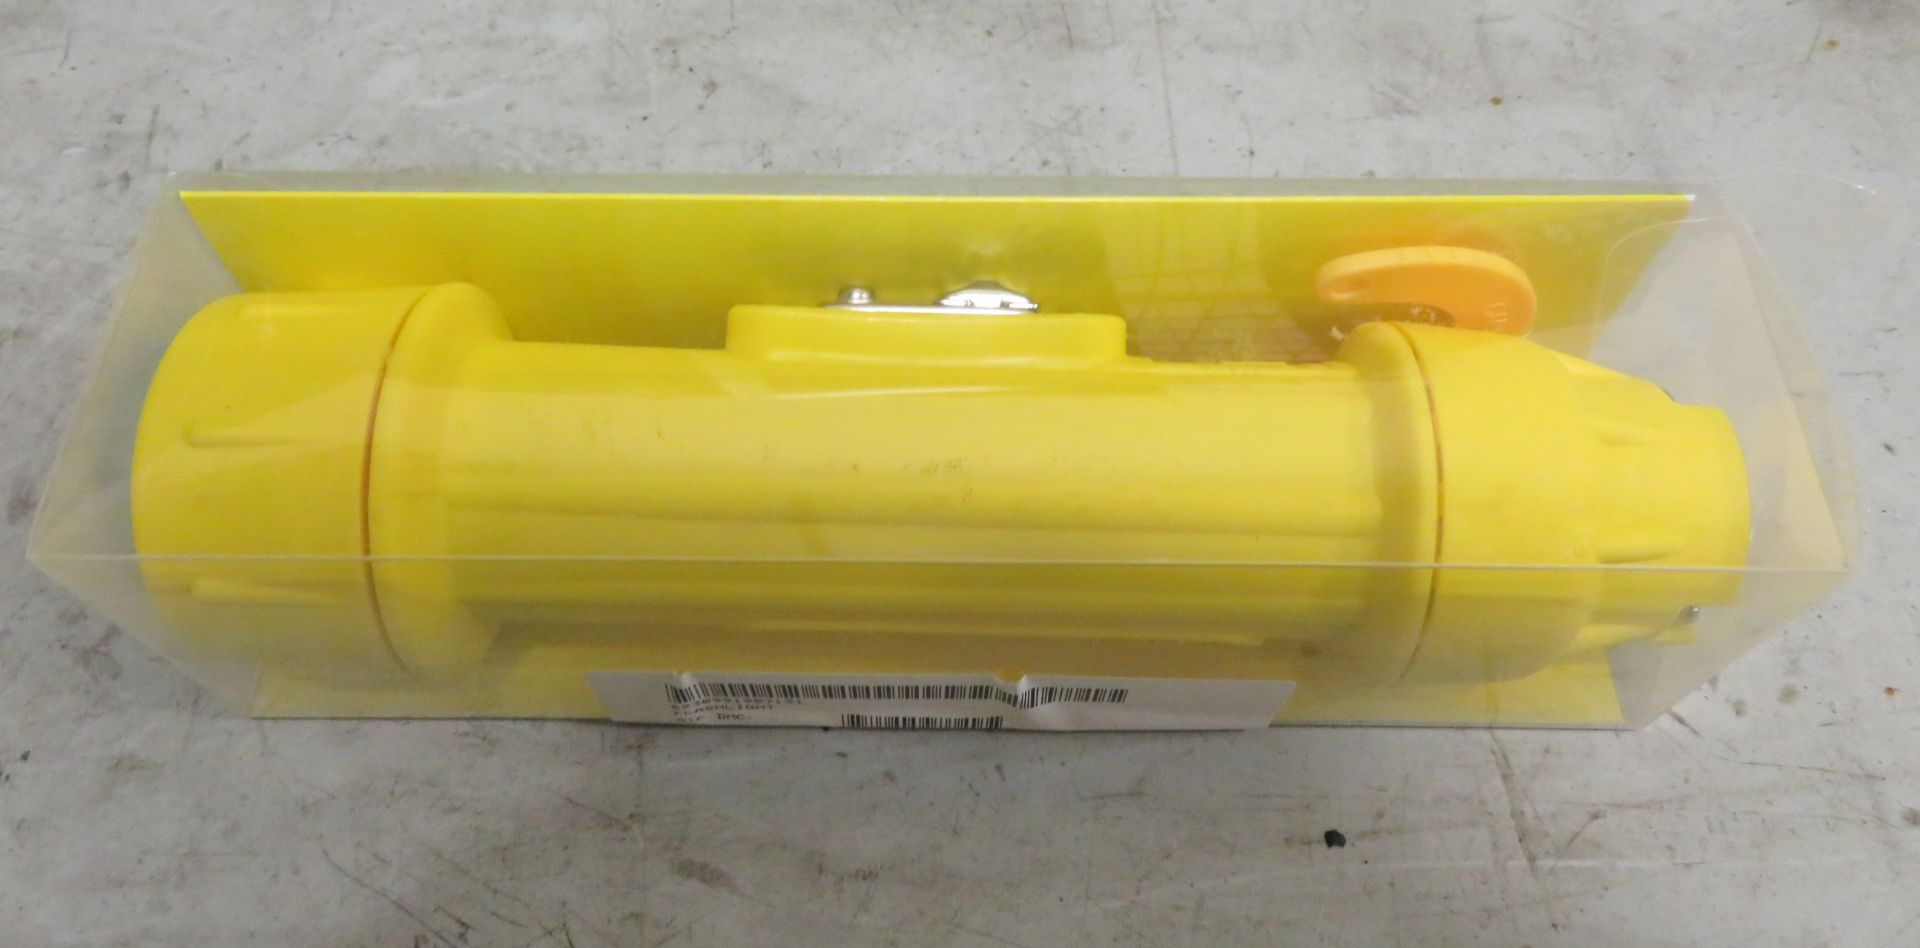 20x S A Equip Yellow 2-Cell Safety Torches - Image 2 of 3